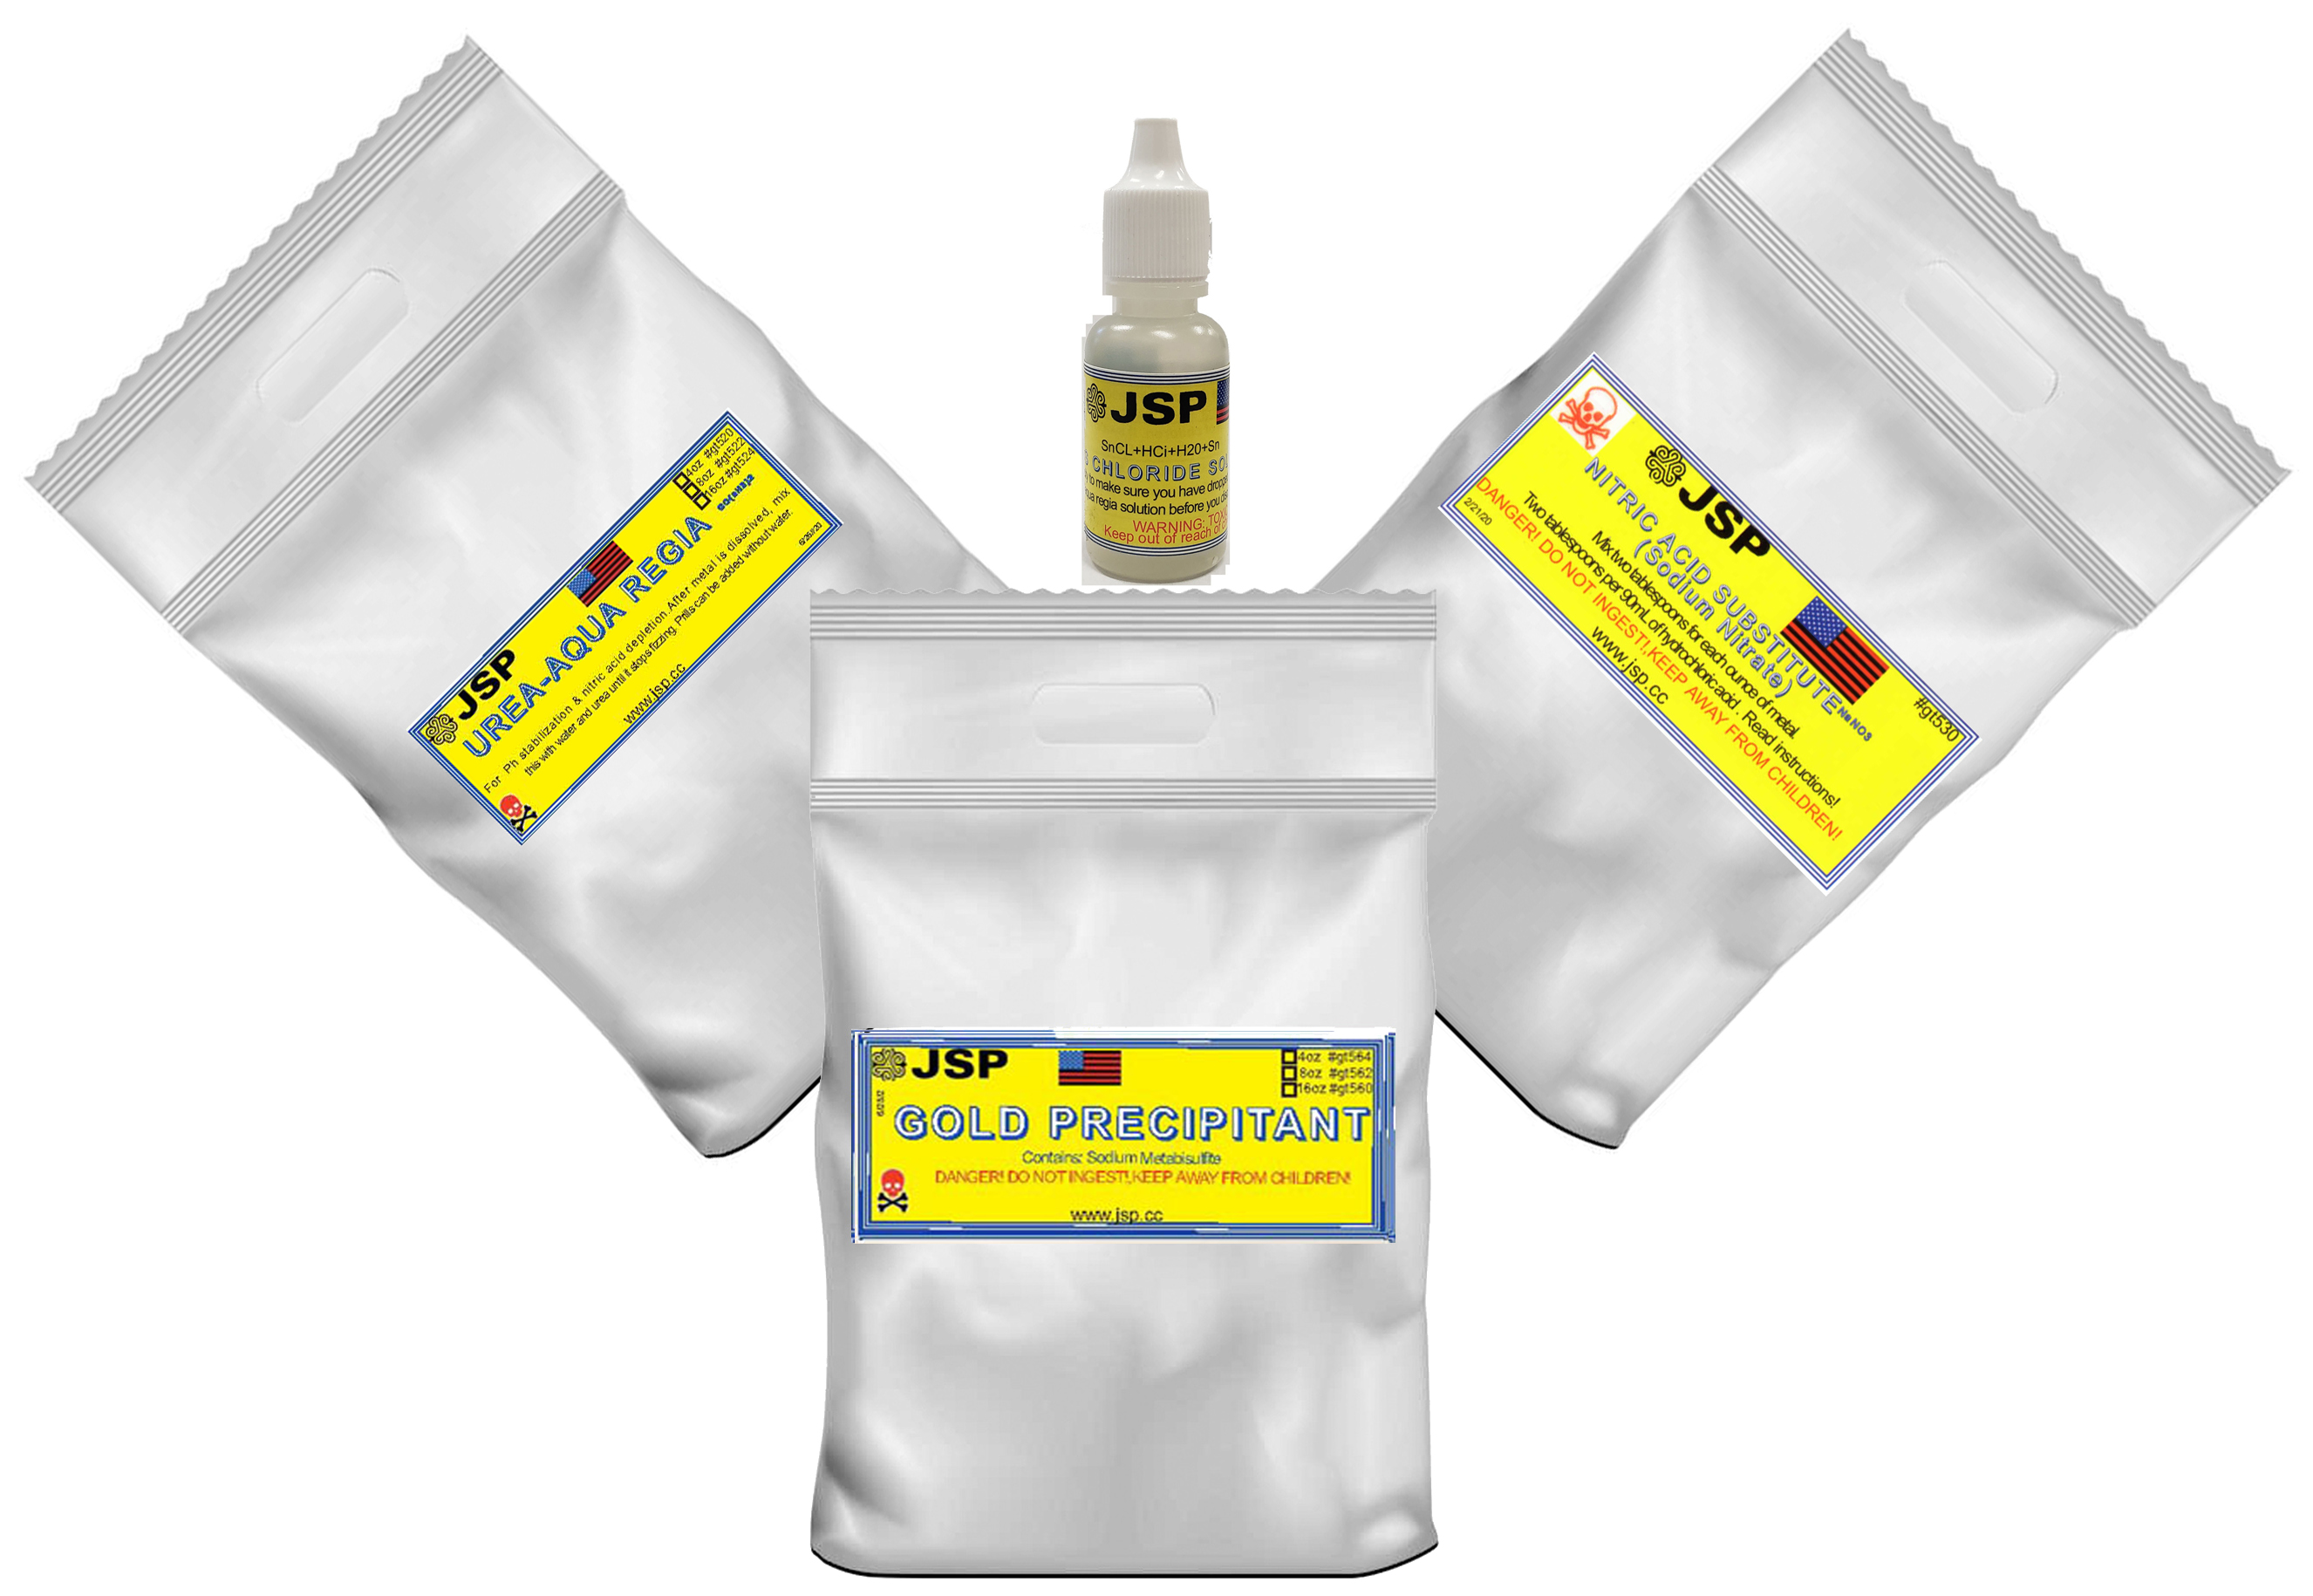 Aqua regia gold refining supply kit, 3x 1/2lb bags+ Gold Precipitant +Stannous Chloride with instructions.